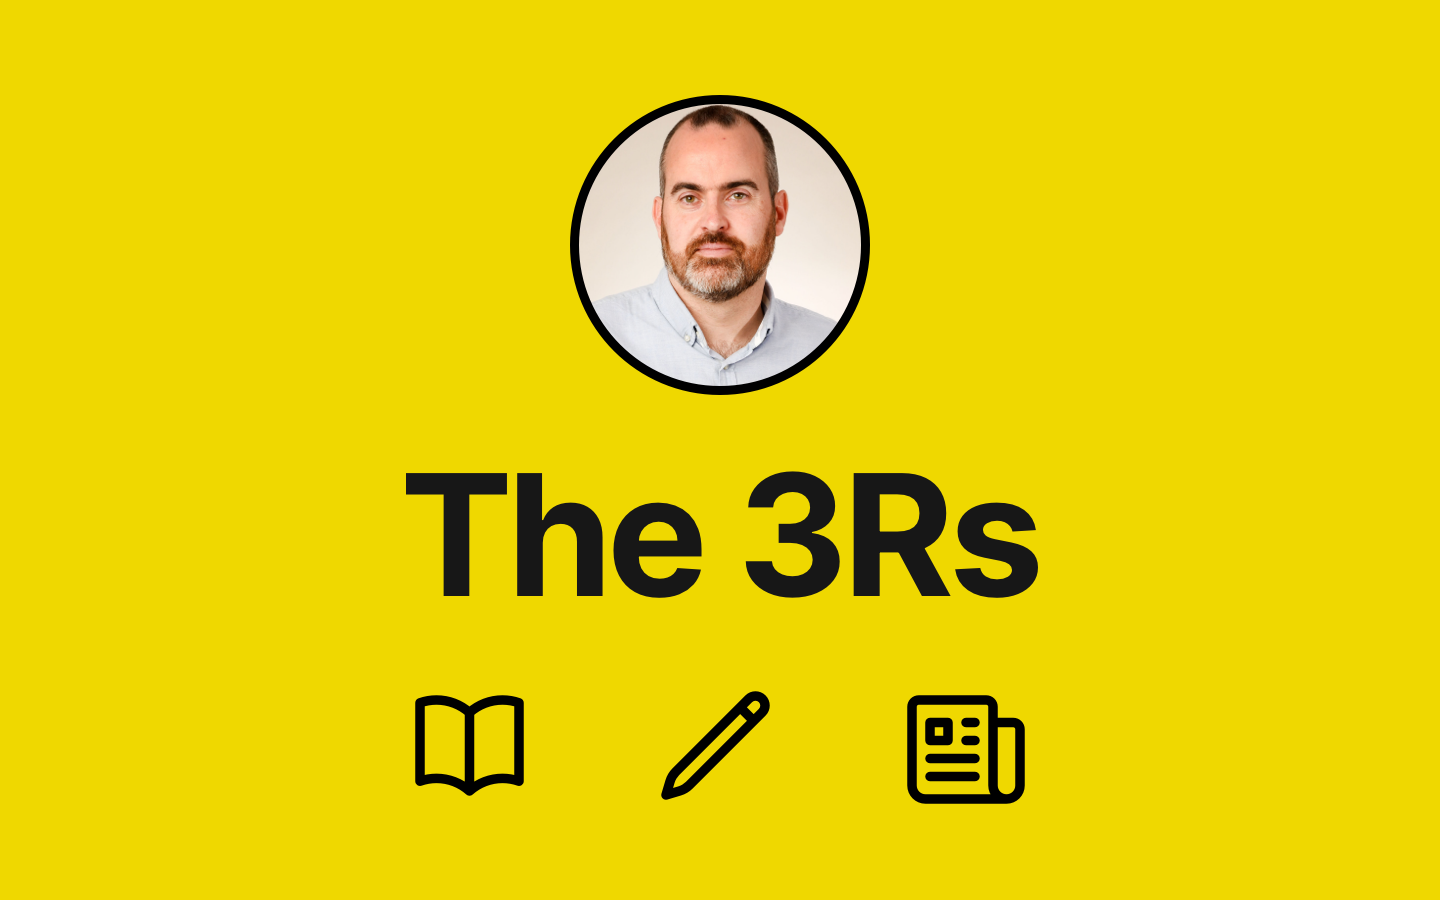 The 3Rs - Reading, writing, and research to be interested in #34 feature image